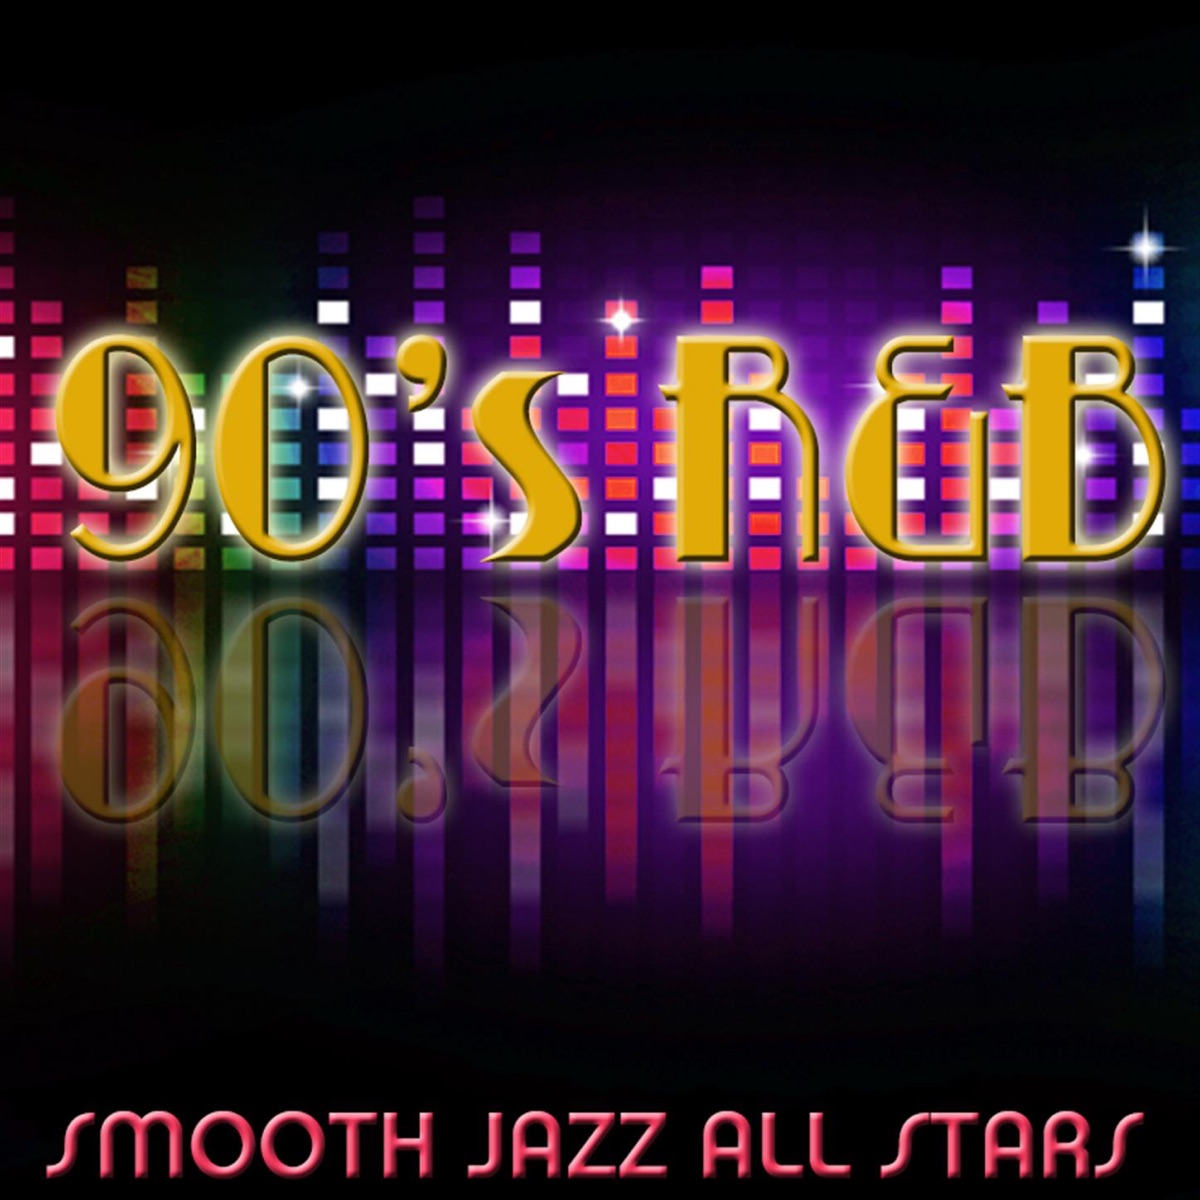 Classic R&B Hits - Album by Smooth Jazz All Stars - Apple Music